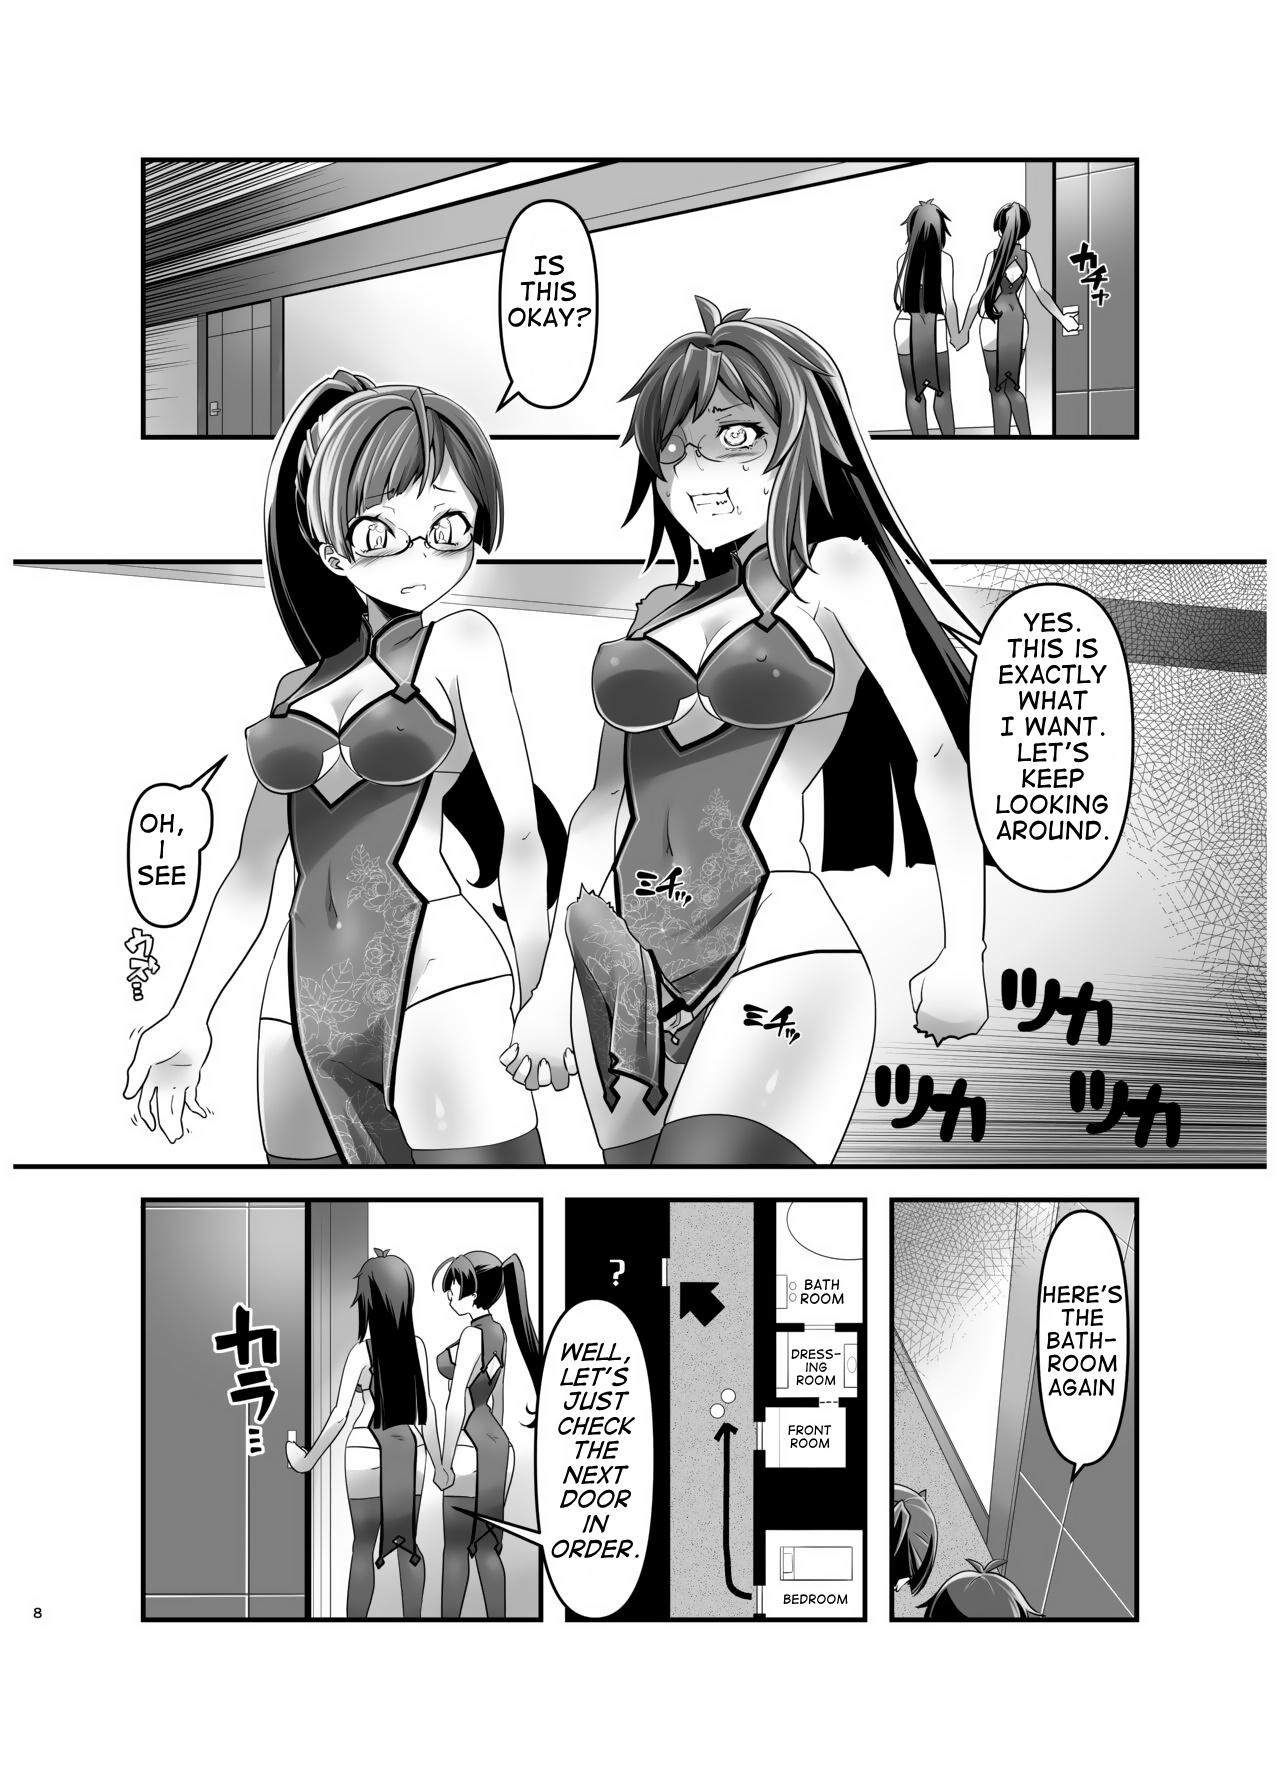 Groupsex Ore ga Bunretsu shite Isekai de TS suru Hanashi 4 | The Story of How I Split Up and TS In a Different World Ch 4 Tribute - Page 7